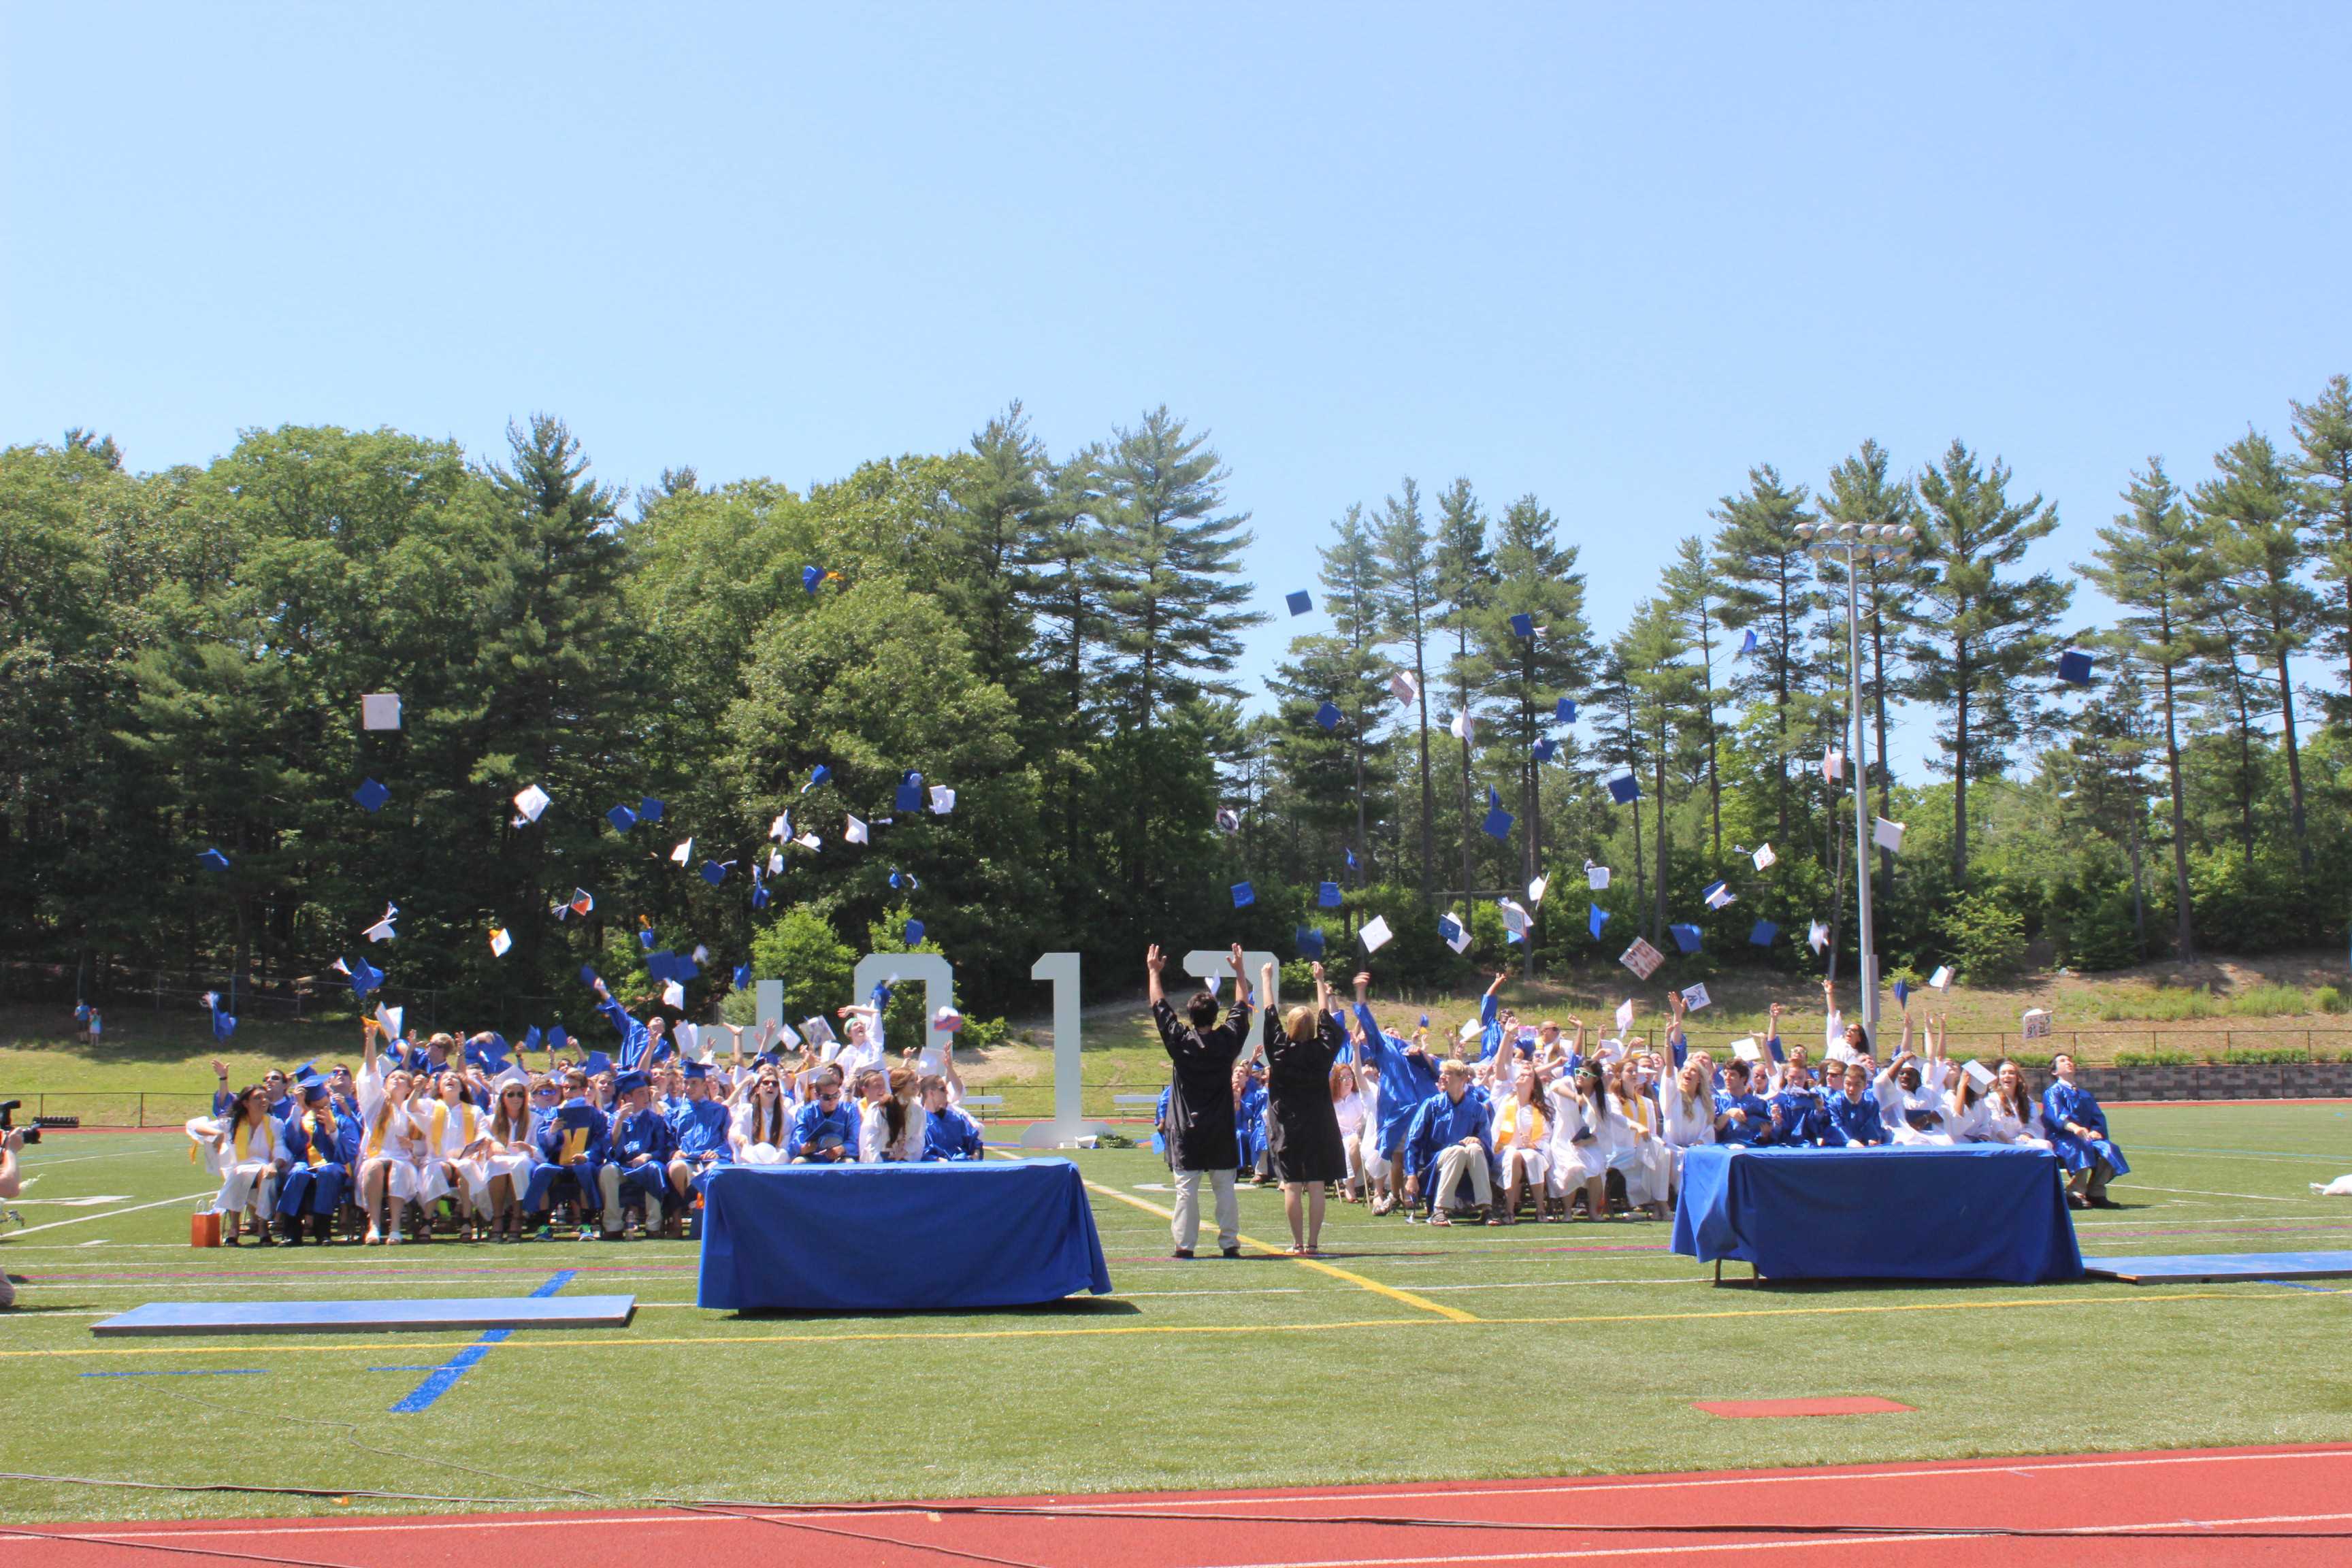 The members of the Class of 2013 throw their caps in the air in celebration after graduating.